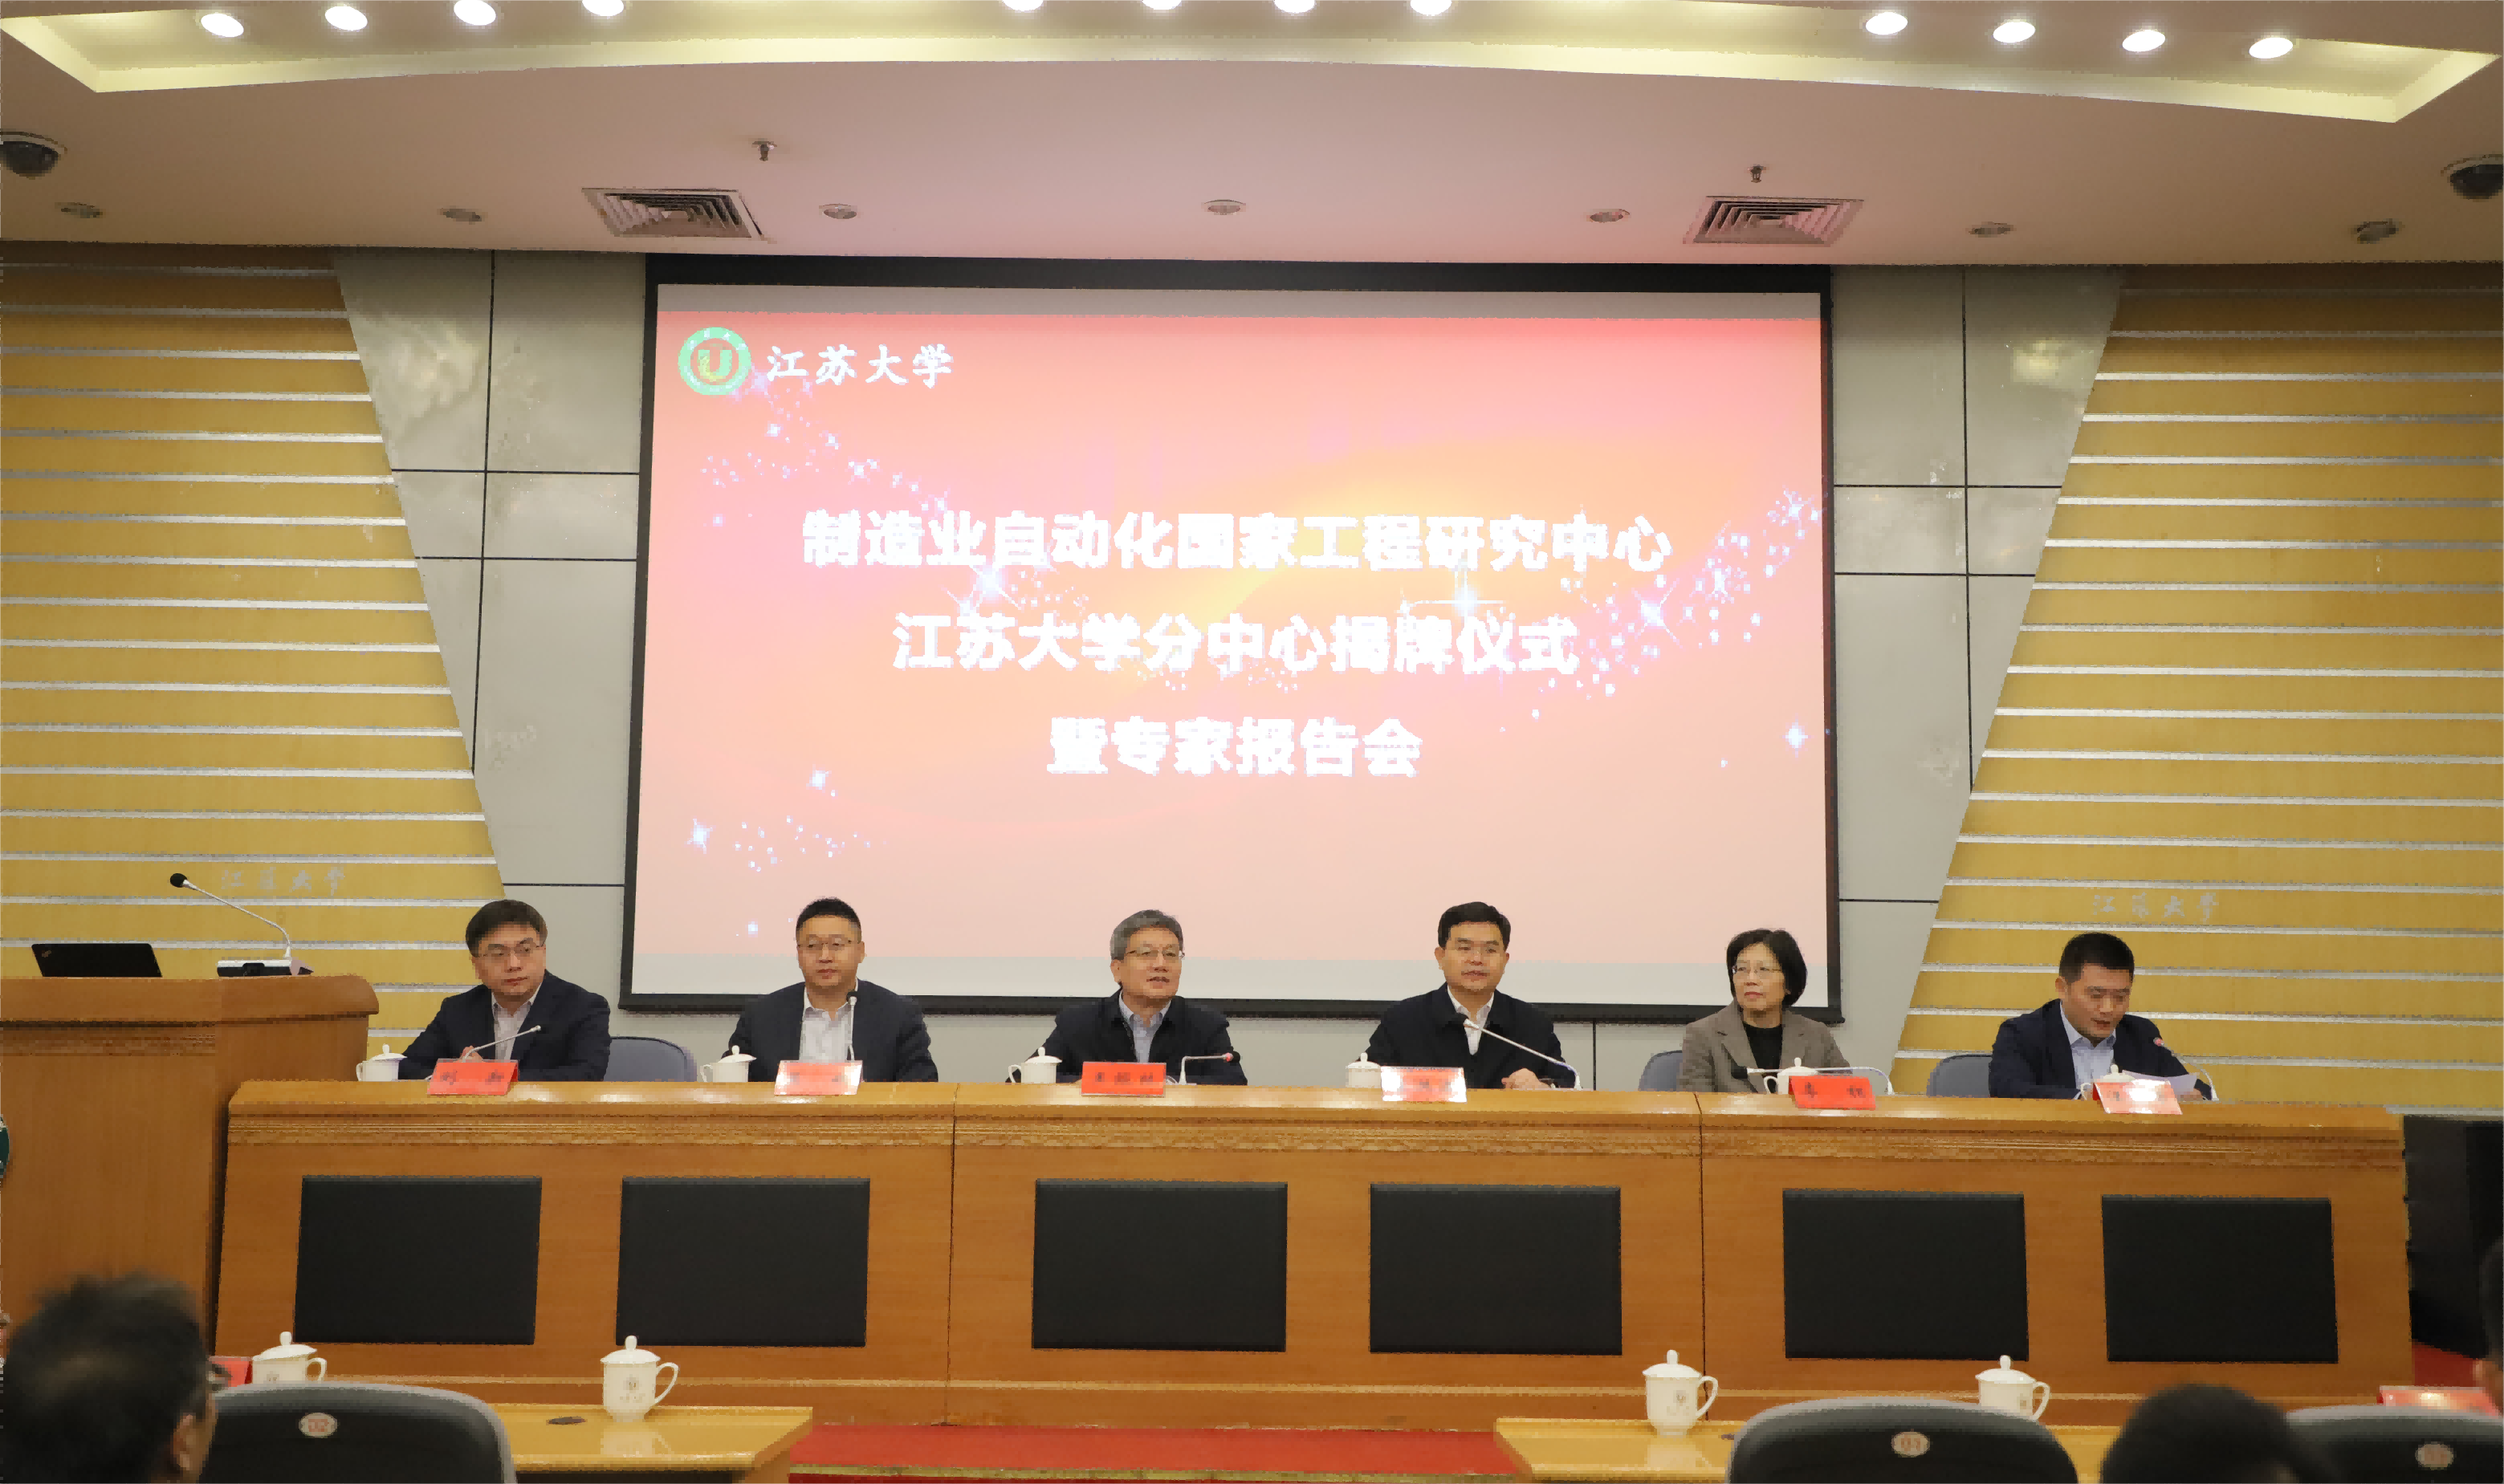 Changzhou Engineering and Technology Institute of Jiangsu University participating in the manufacturing automation national engineering research center Jiangsu University branch center opening ceremon